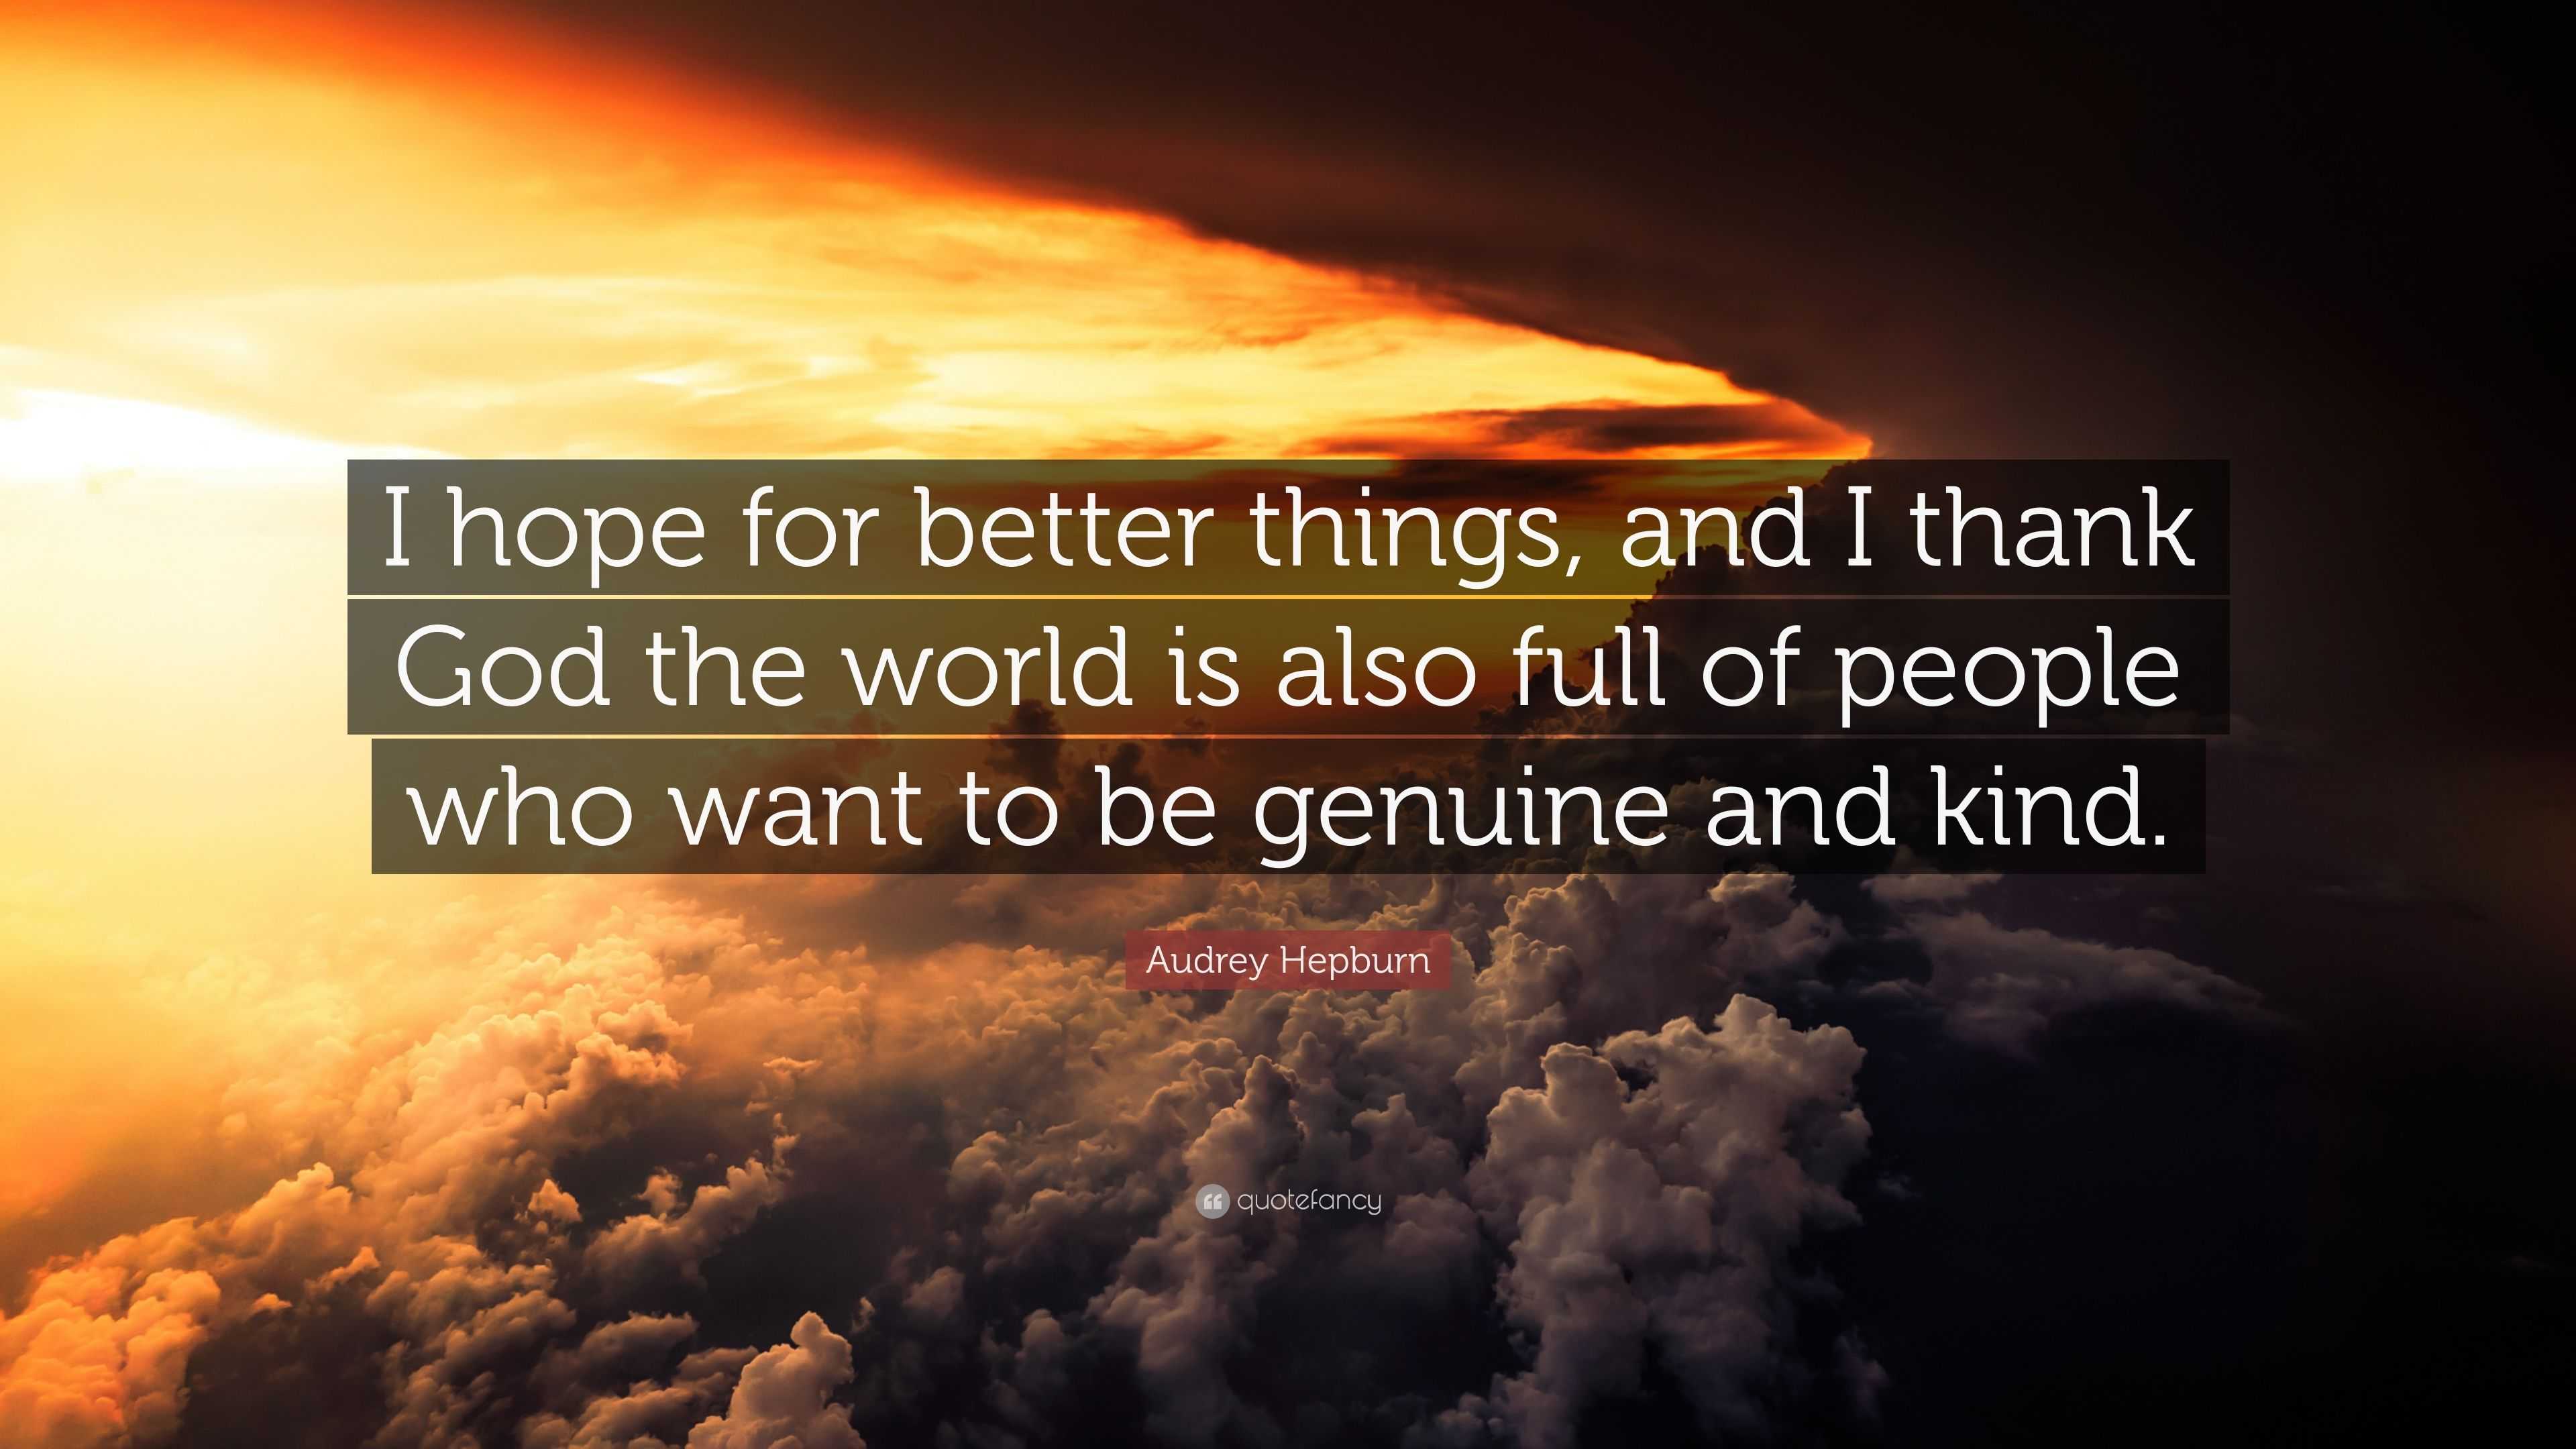 Audrey Hepburn Quote: “I hope for better things, and I thank God the ...